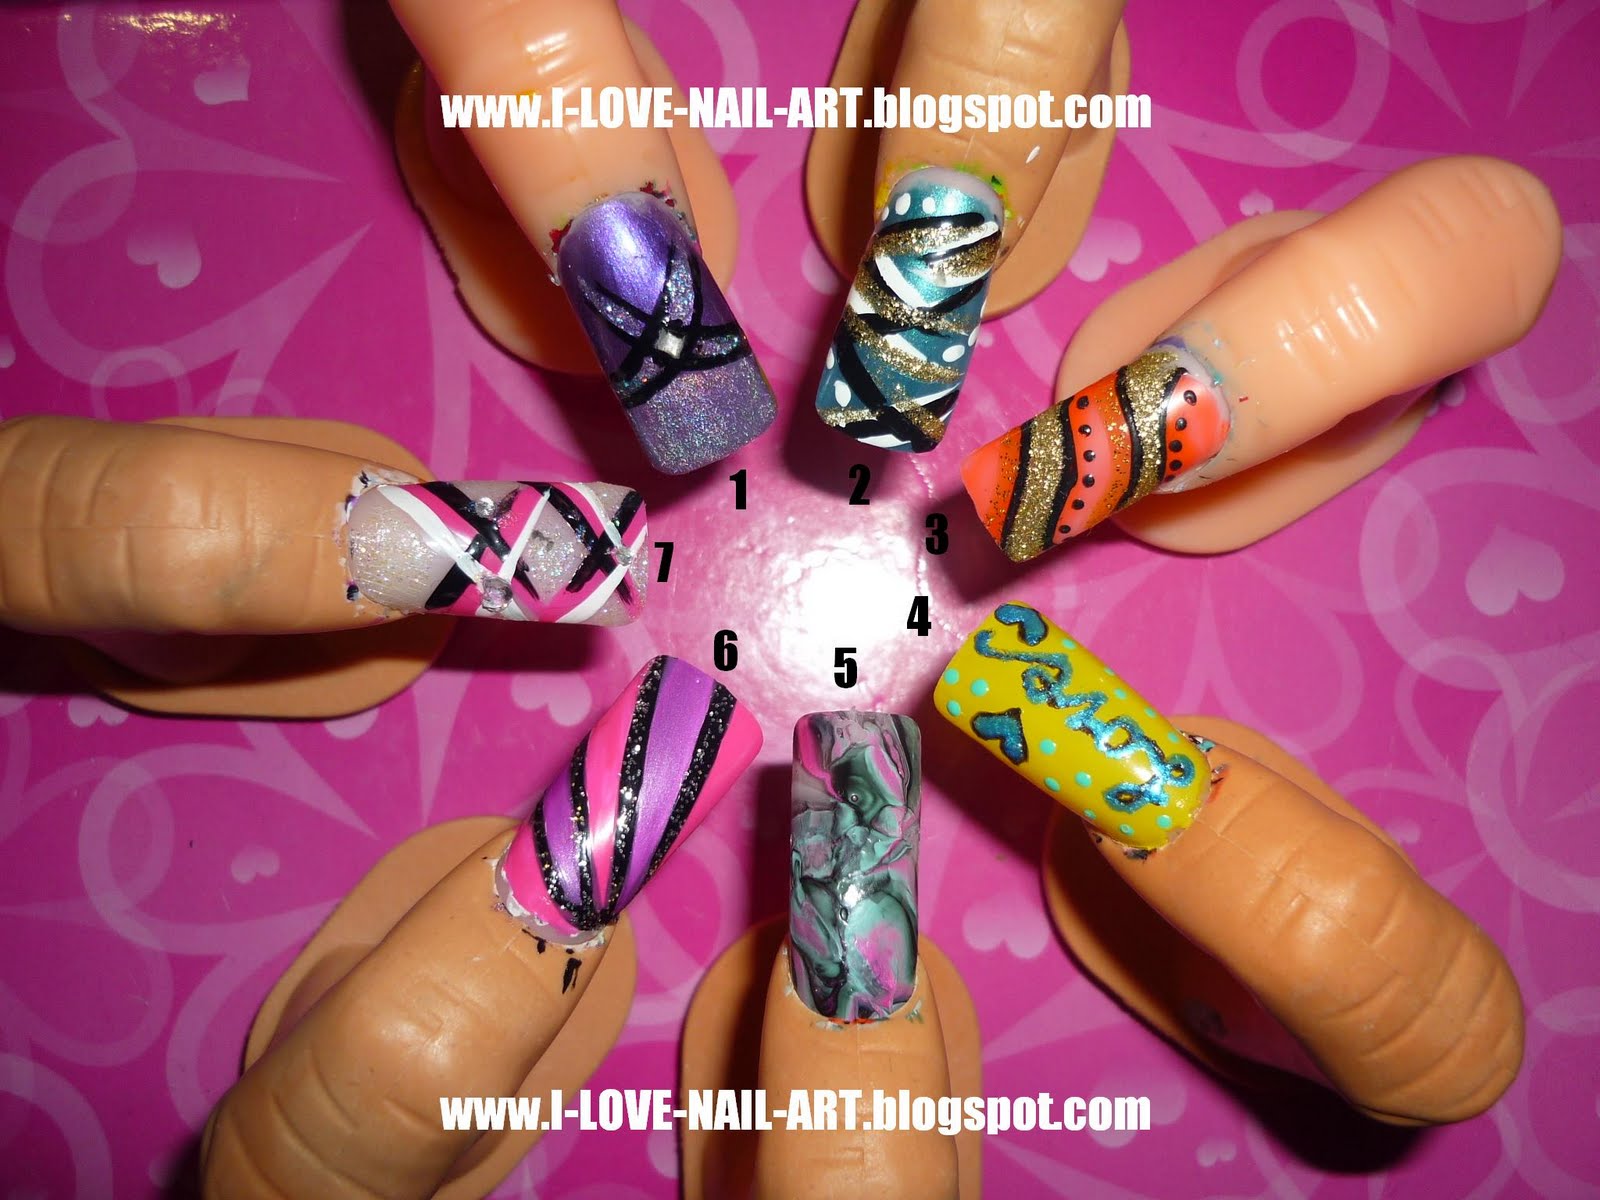 7. "Nail Art Lover? These Quotes Will Make You Want to Paint Your Nails" - wide 8